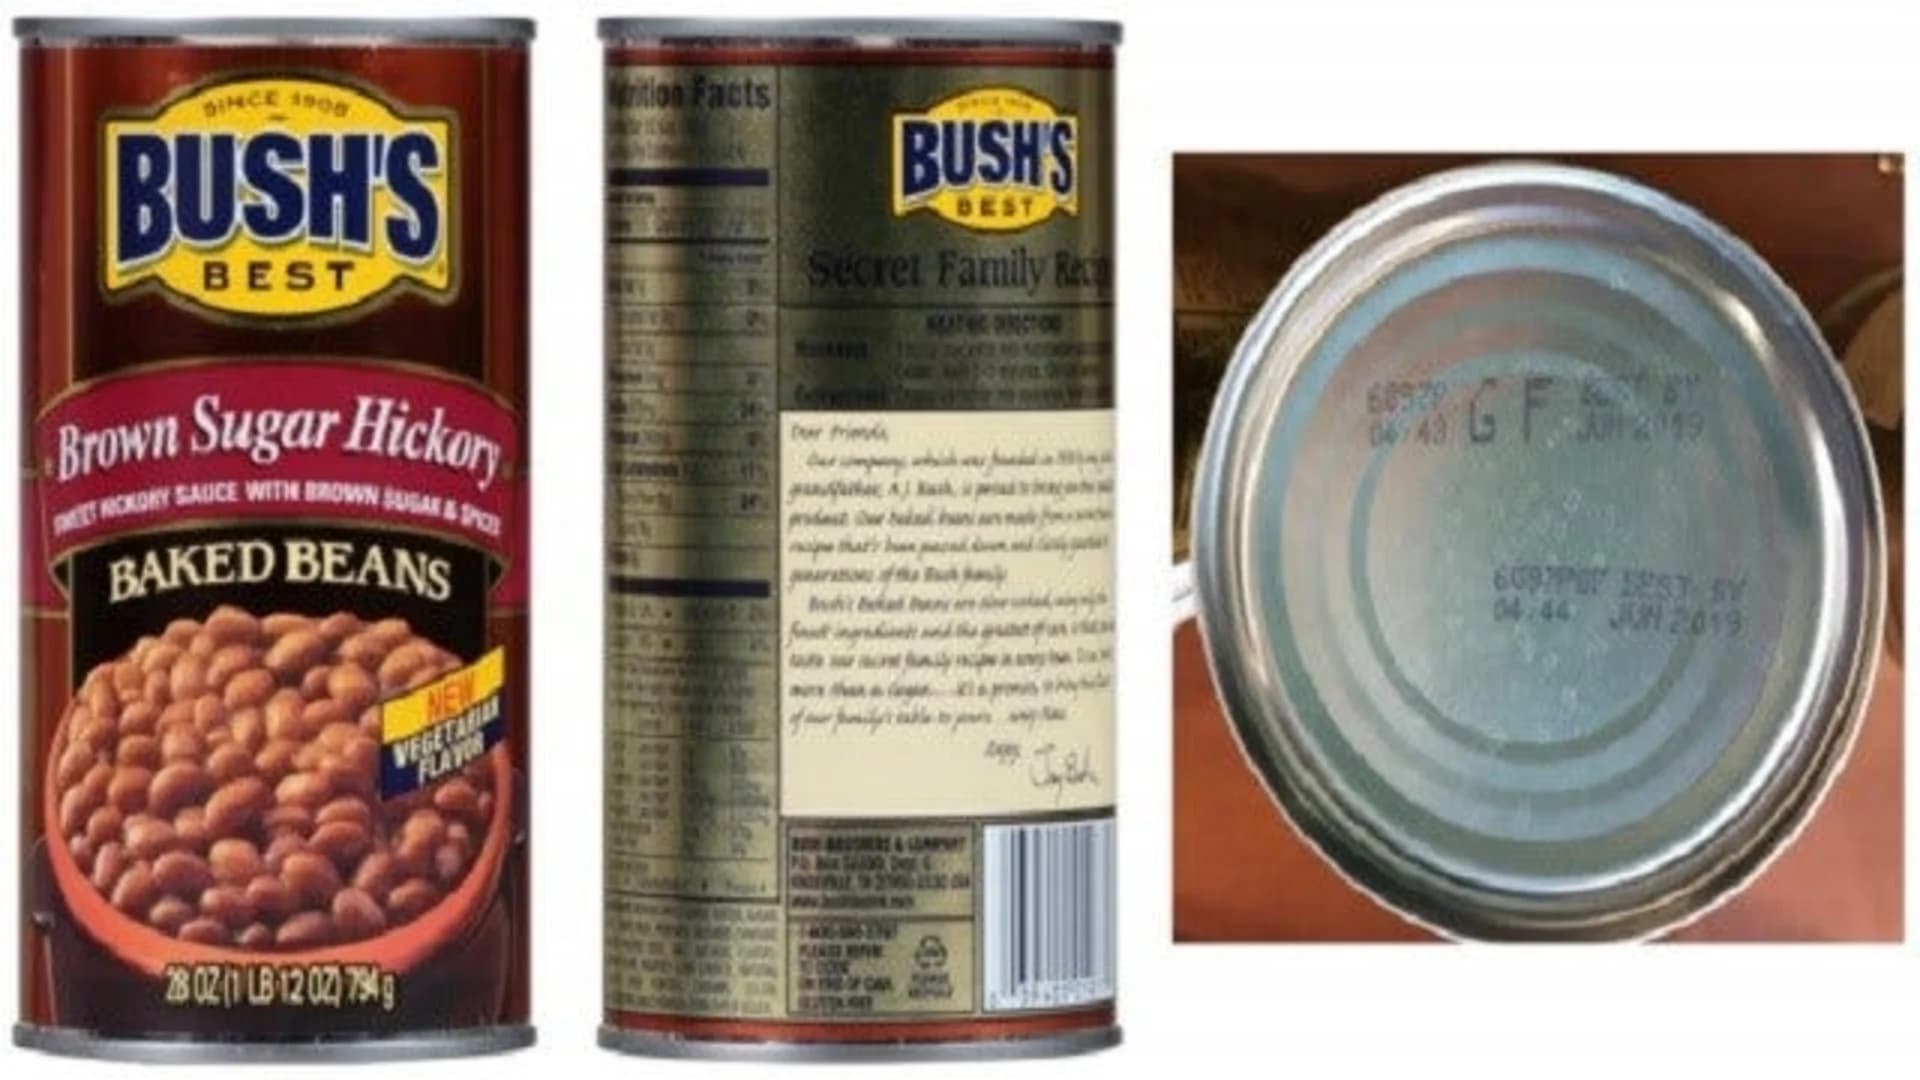 Select Bush’s baked beans recalled due to possible can defect